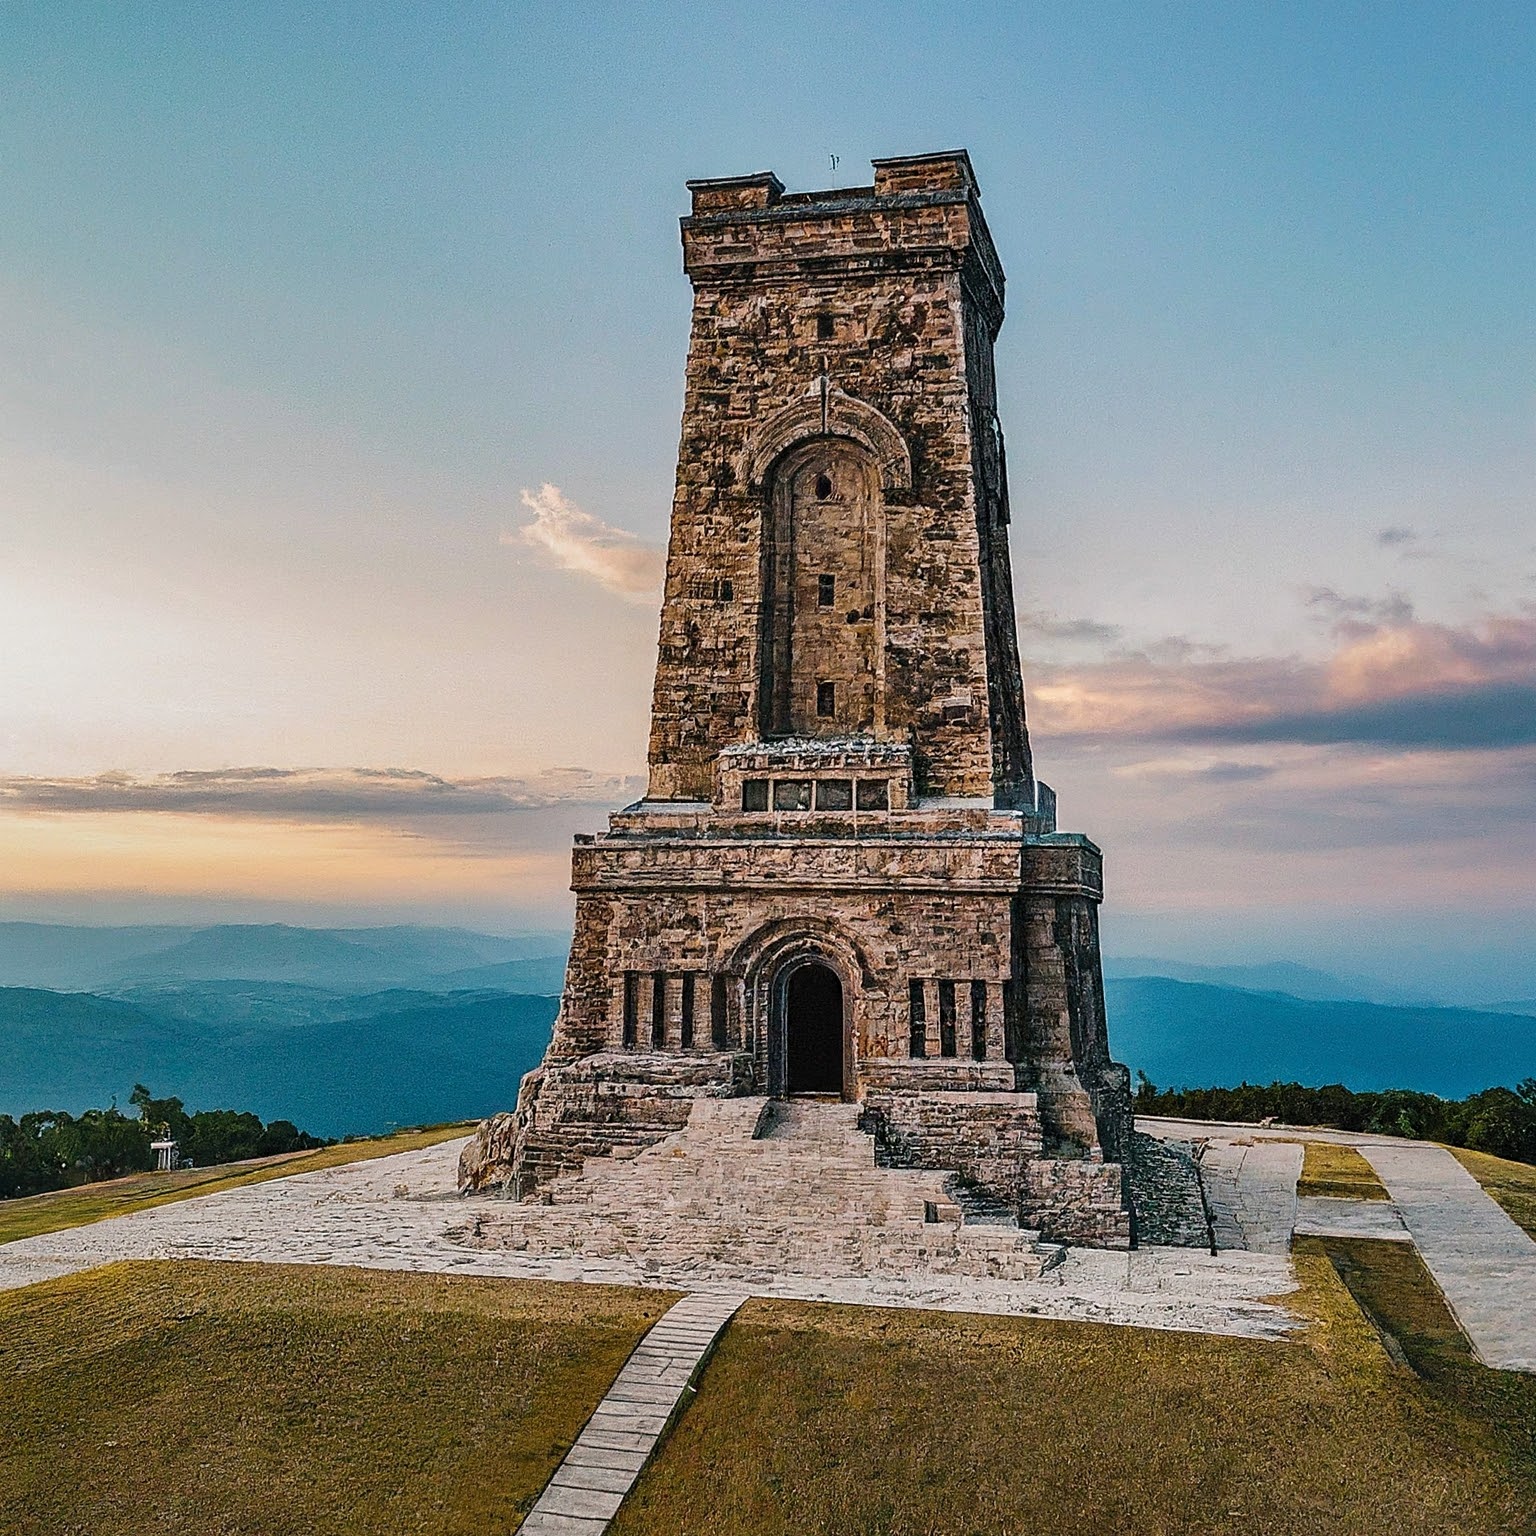 The Shipka Monument, a symbol of Bulgarian freedom, overlooks a scenic mountain landscape.